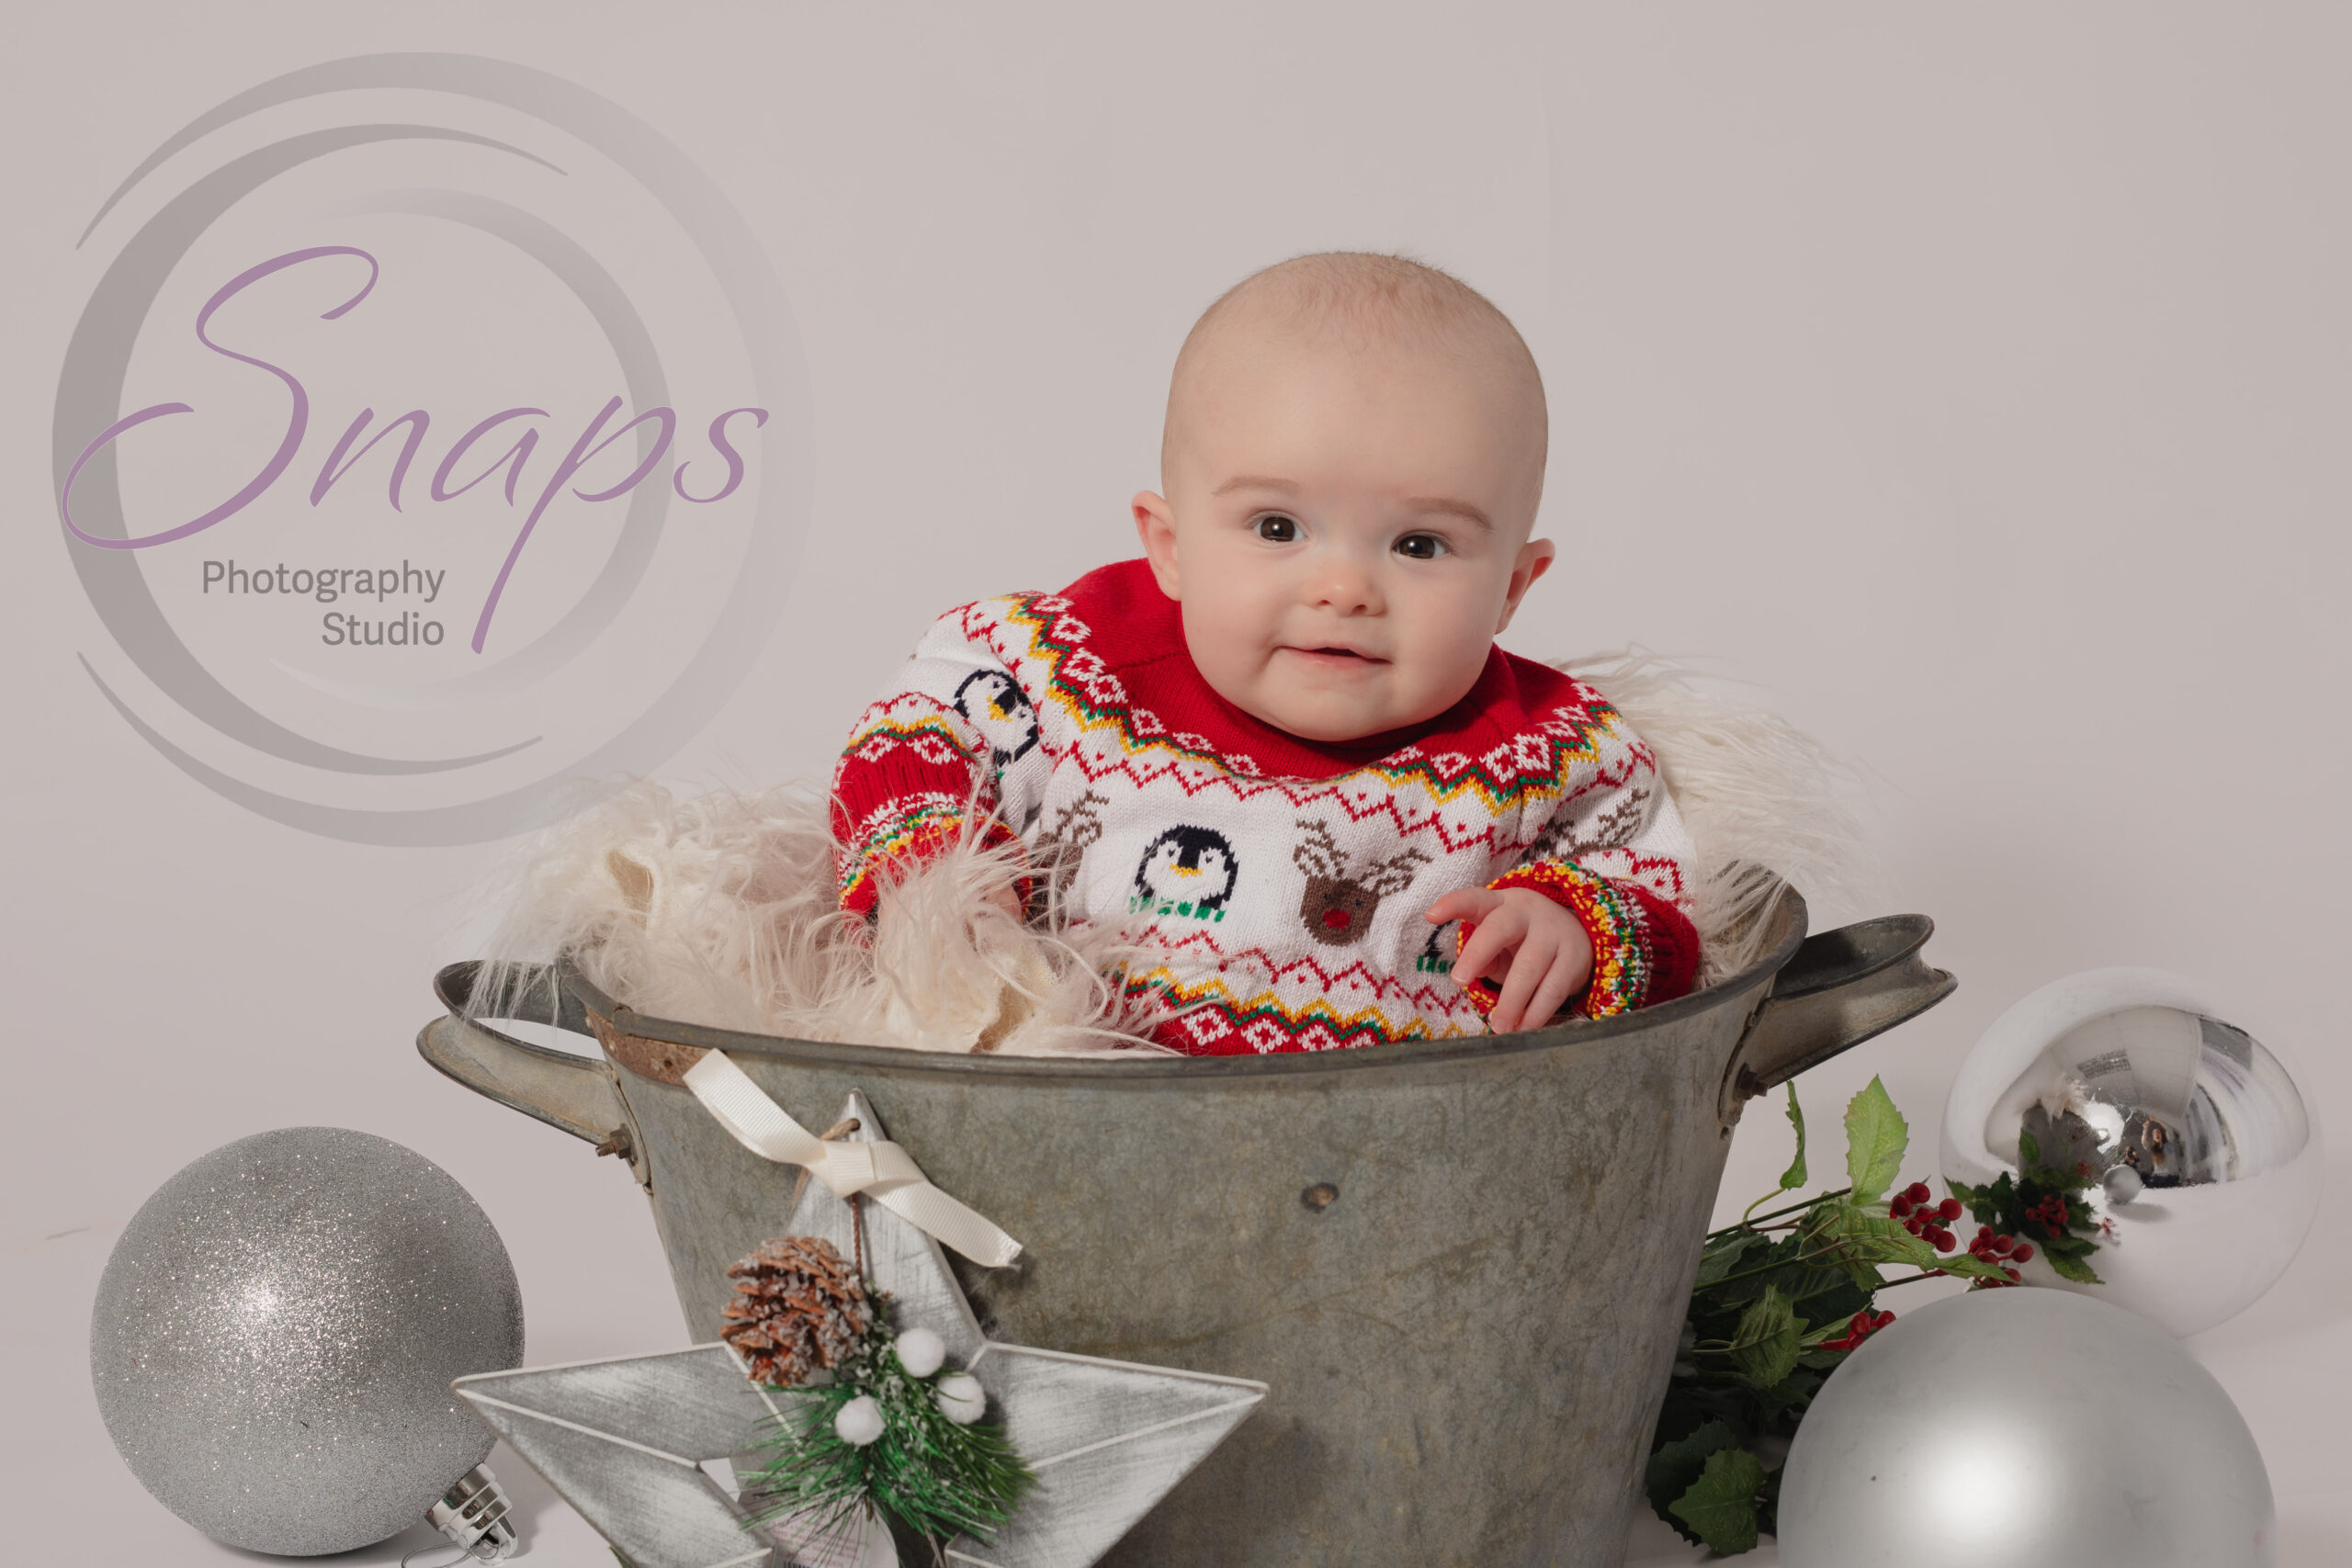 festive baby girl in a bucket with Christmas decorations around her wearing a Chrismtas jumper